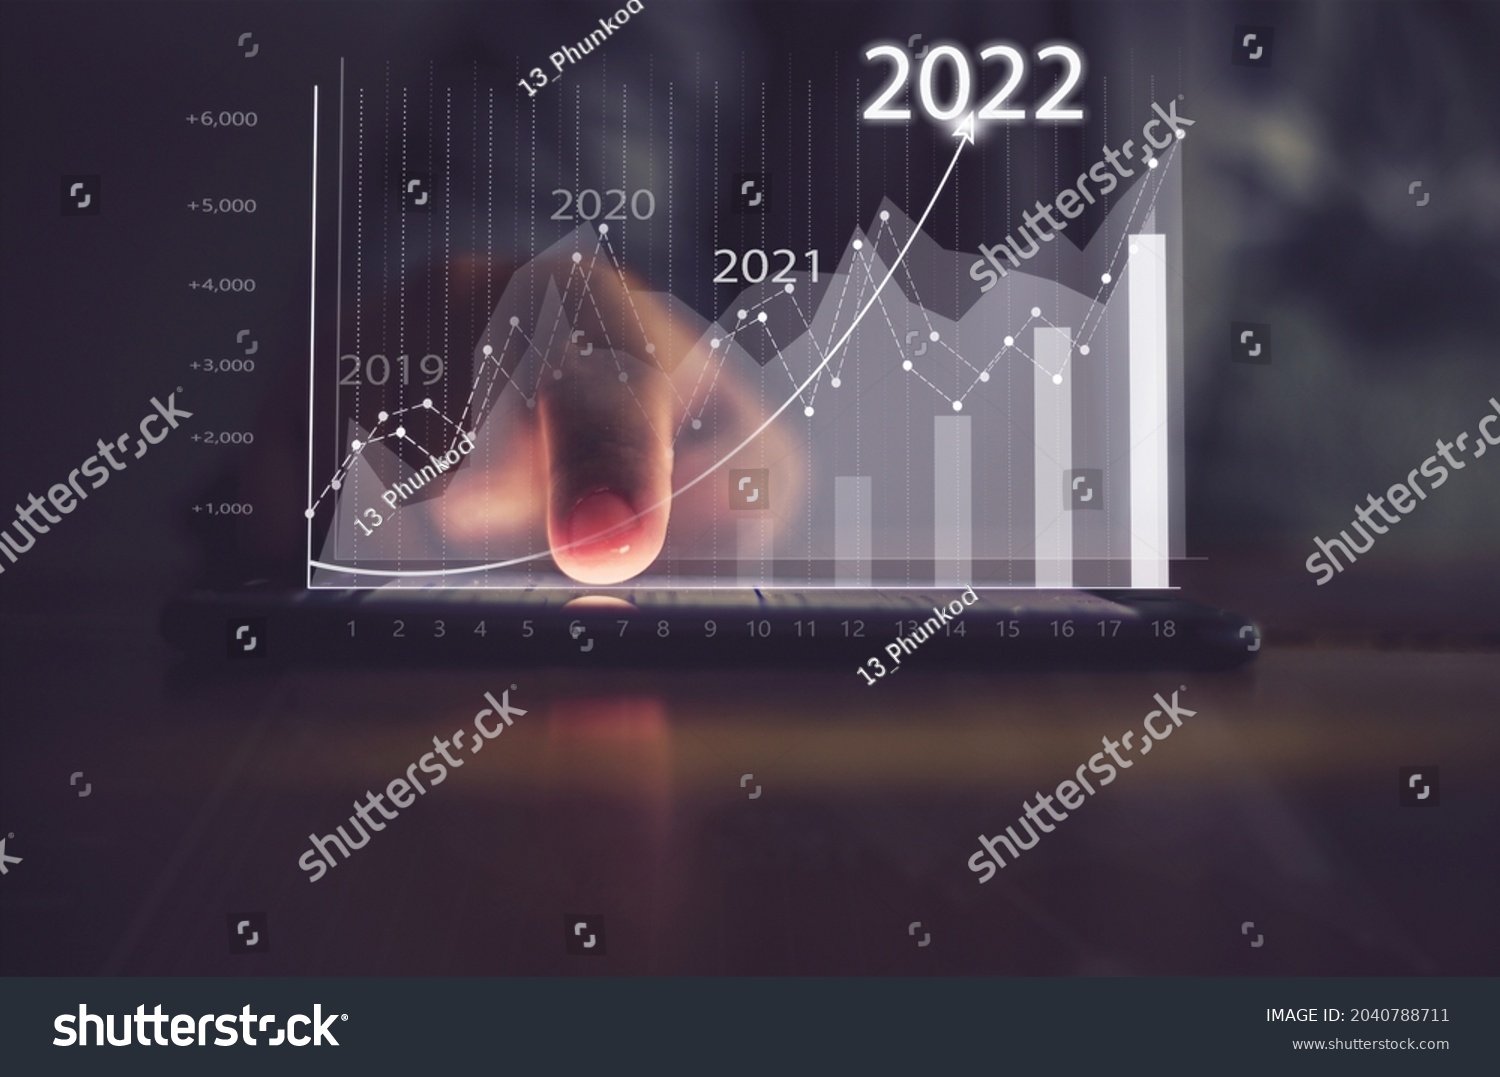 Augmented reality (AR) financial charts showing growing revenue In 2022 floating above digital screen smart phone, businesswoman having meeting about strategy for growth and success #2040788711